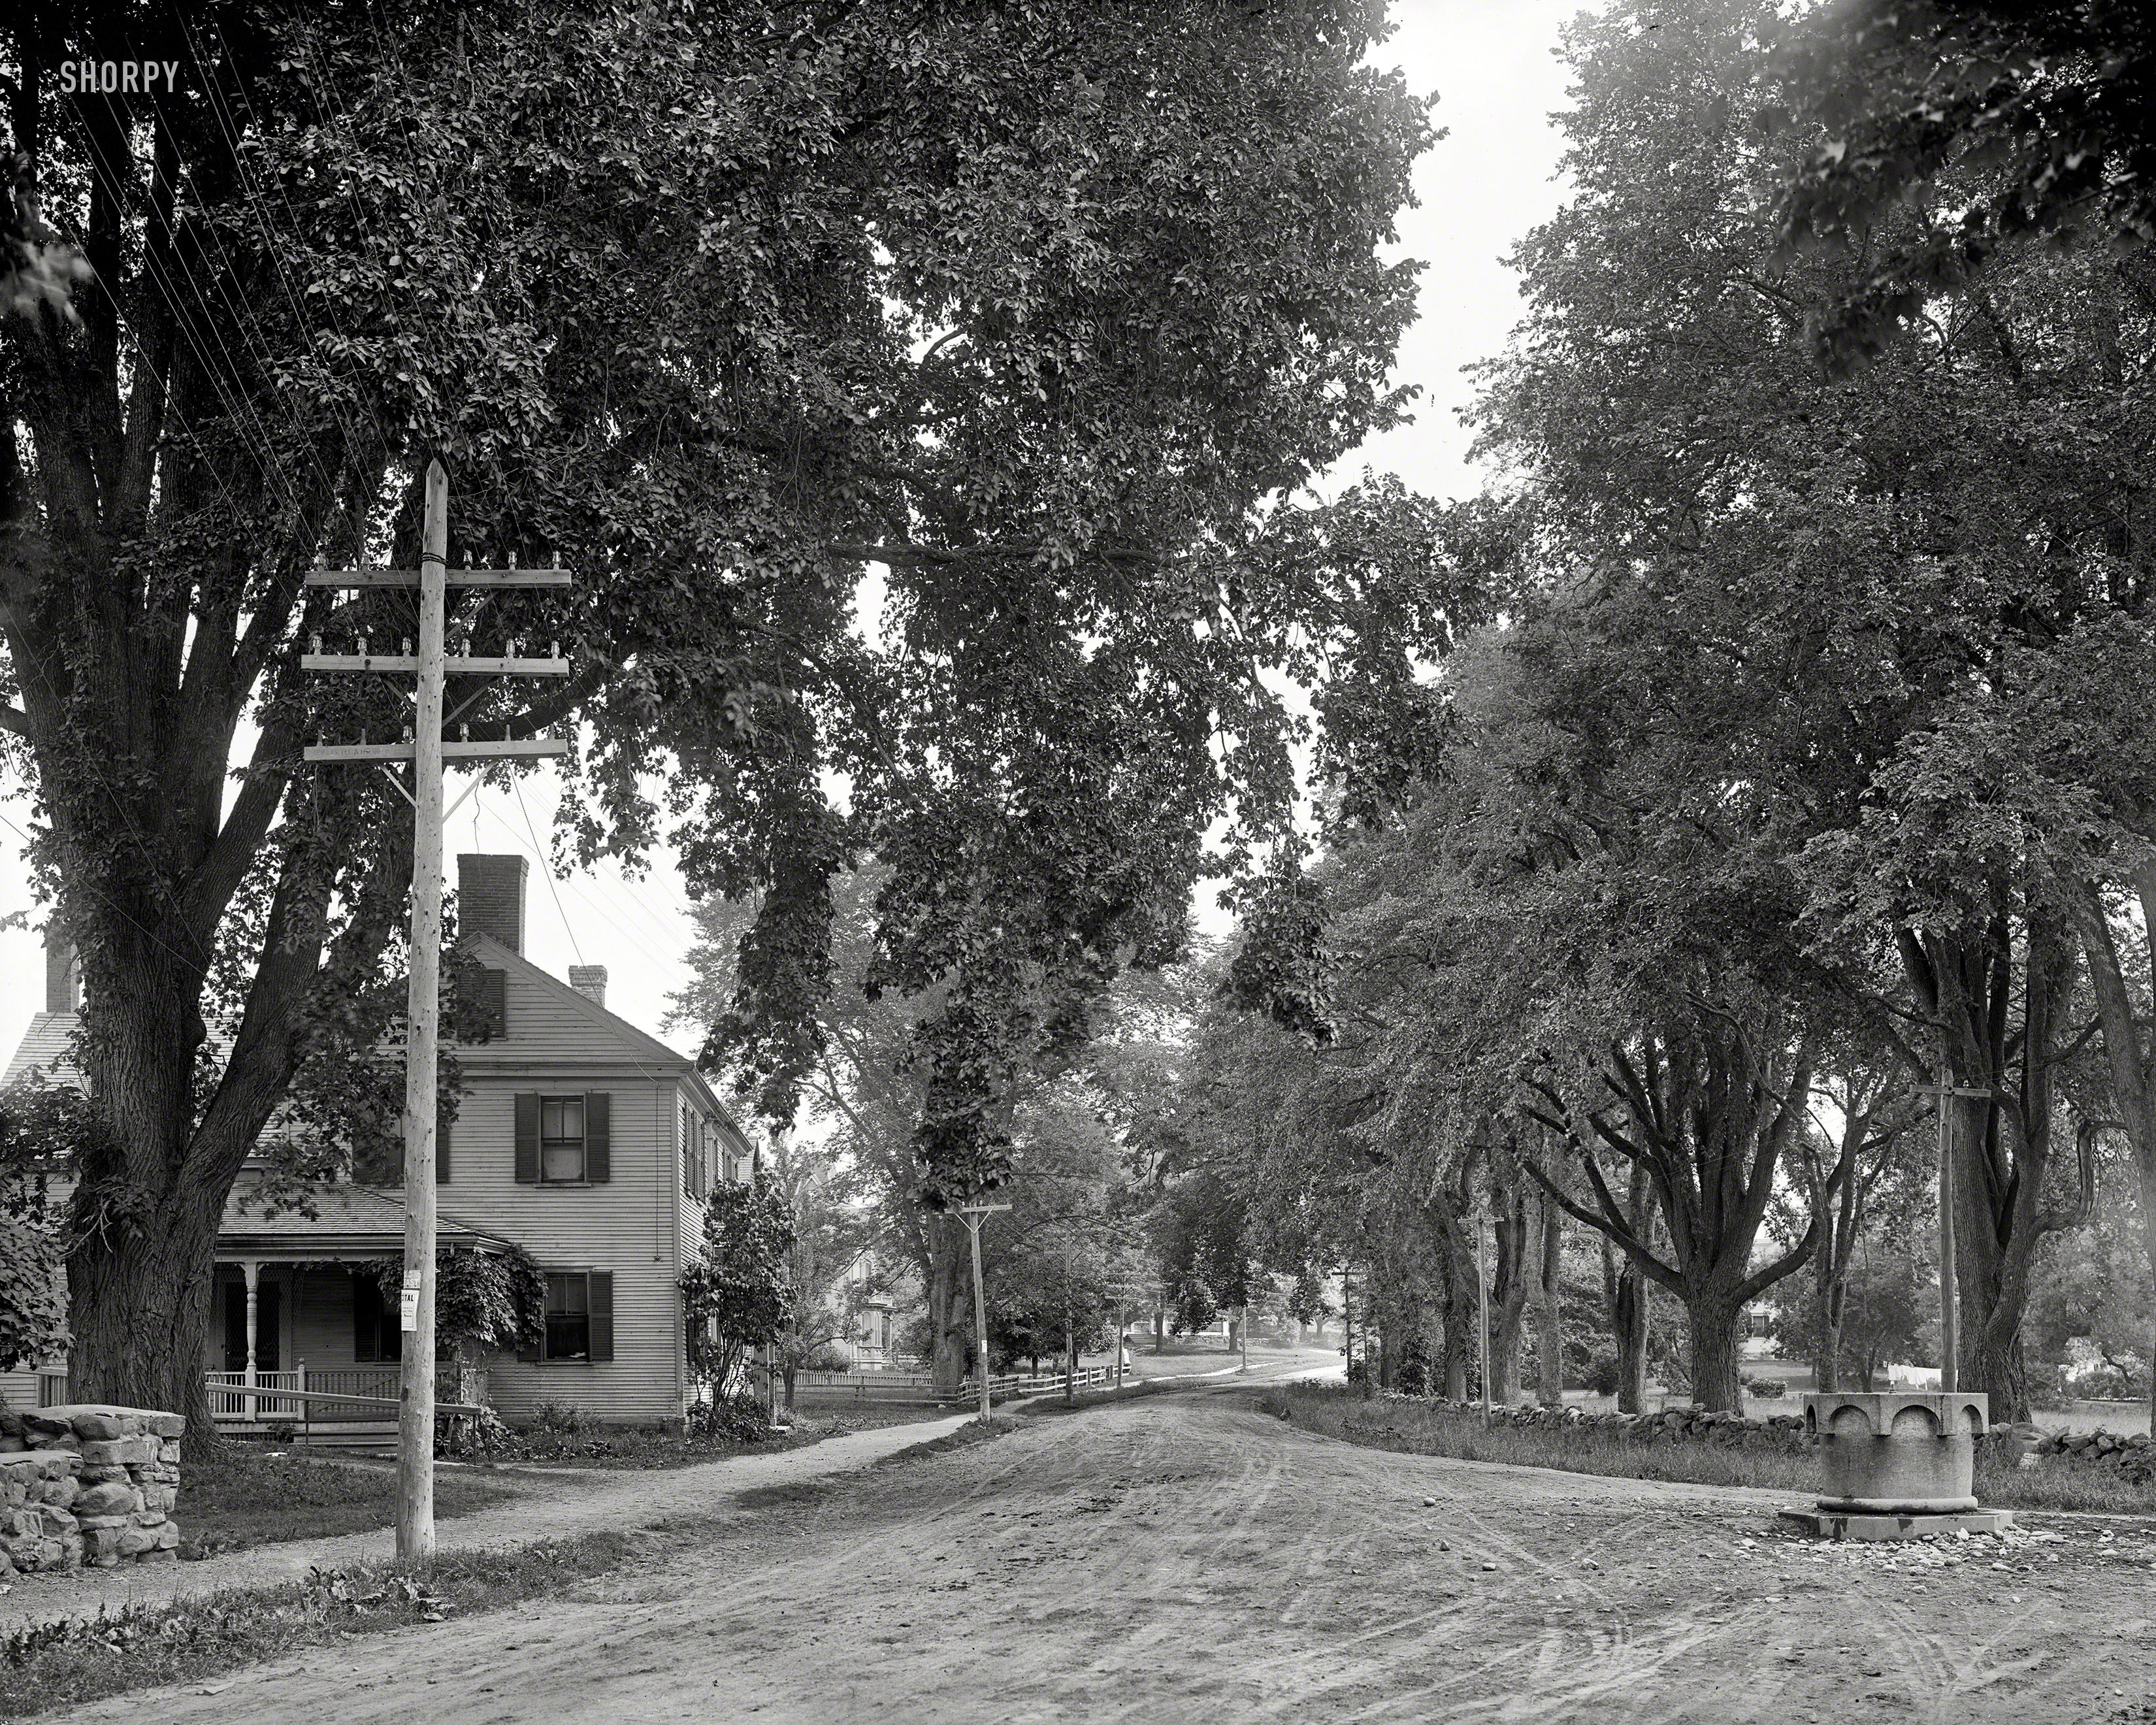 Circa 1908. "Street in York Village, York, Maine." Where perambulating is encouraged and moseying is mandatory. 8x10 glass negative. View full size.